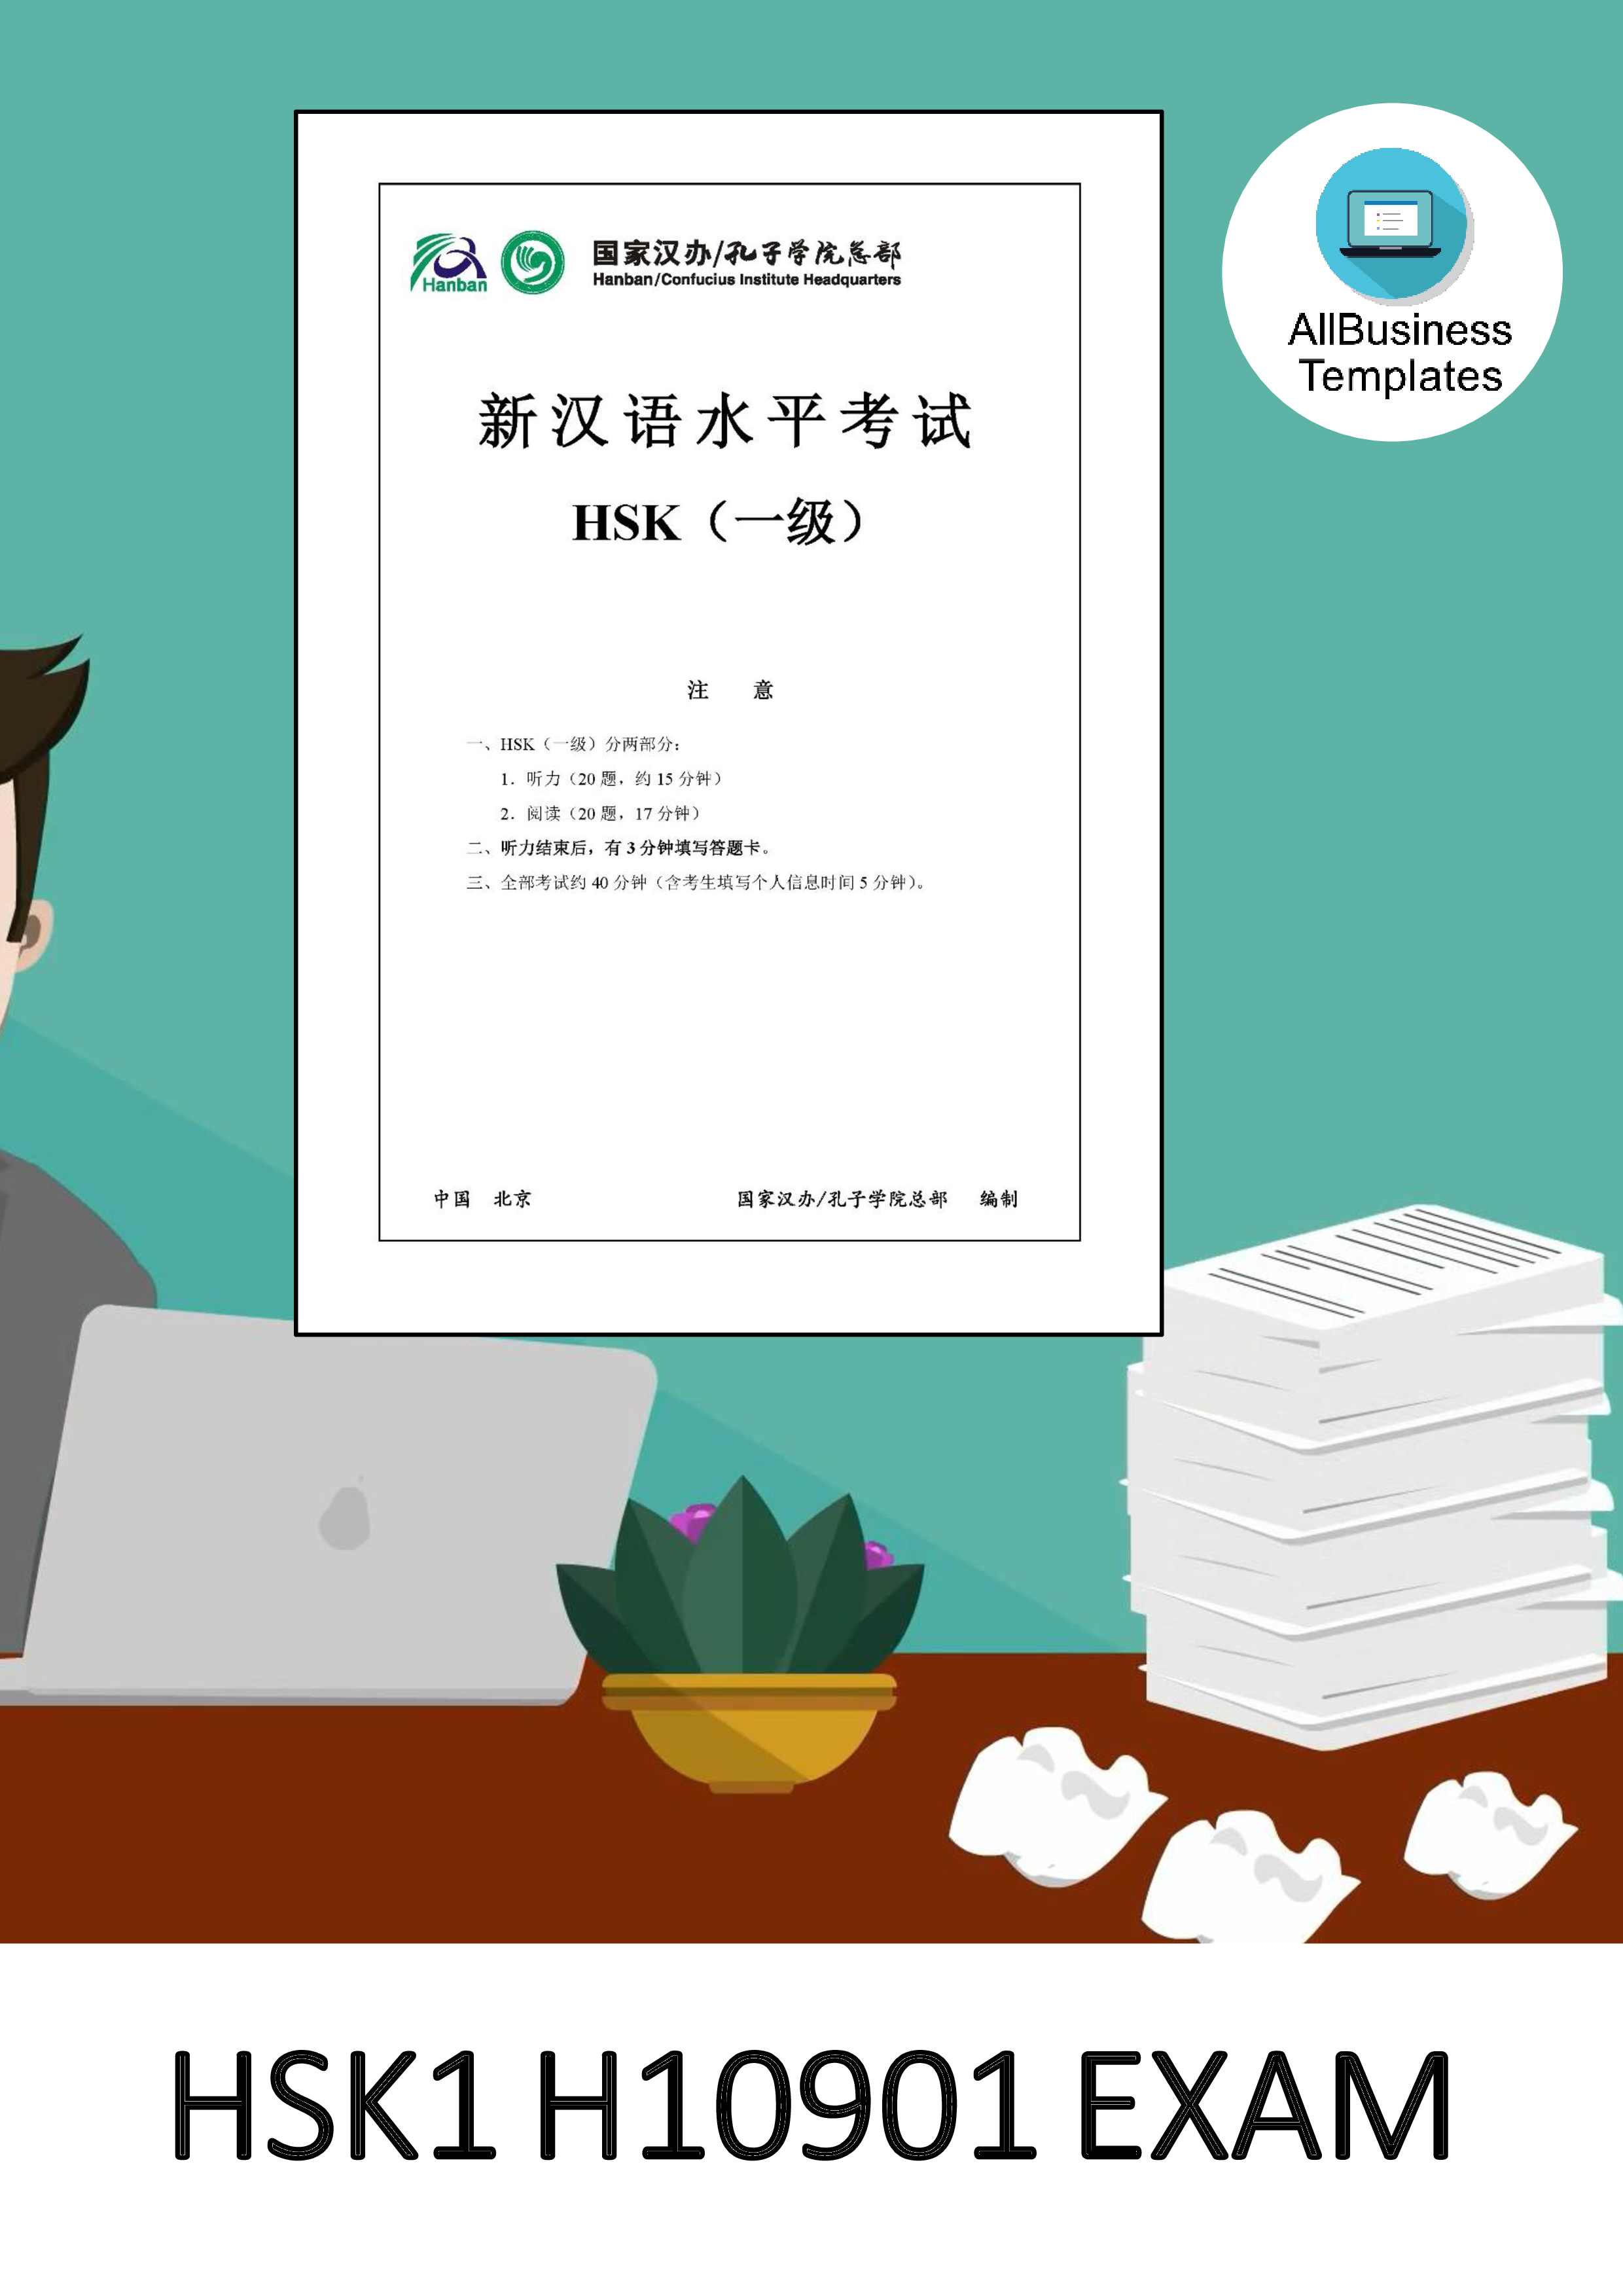 HSK1 Chinese Exam including Answers H10901 Exam 模板